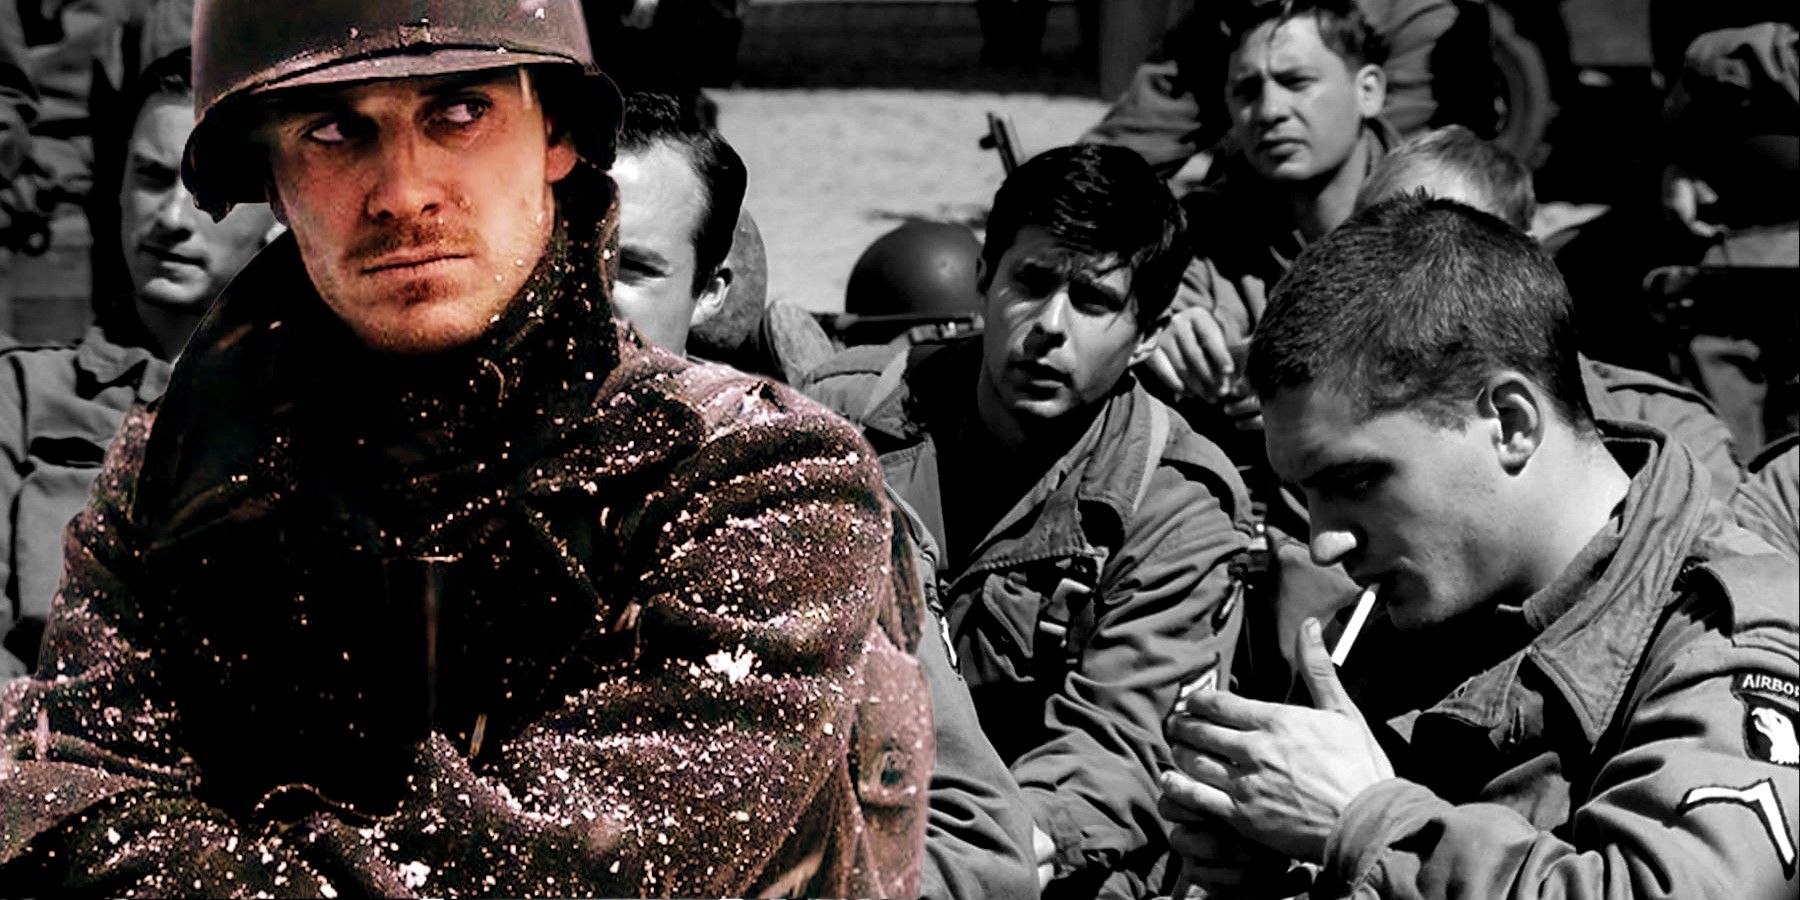 Michael Fassbender and the cast of Band of Brothers